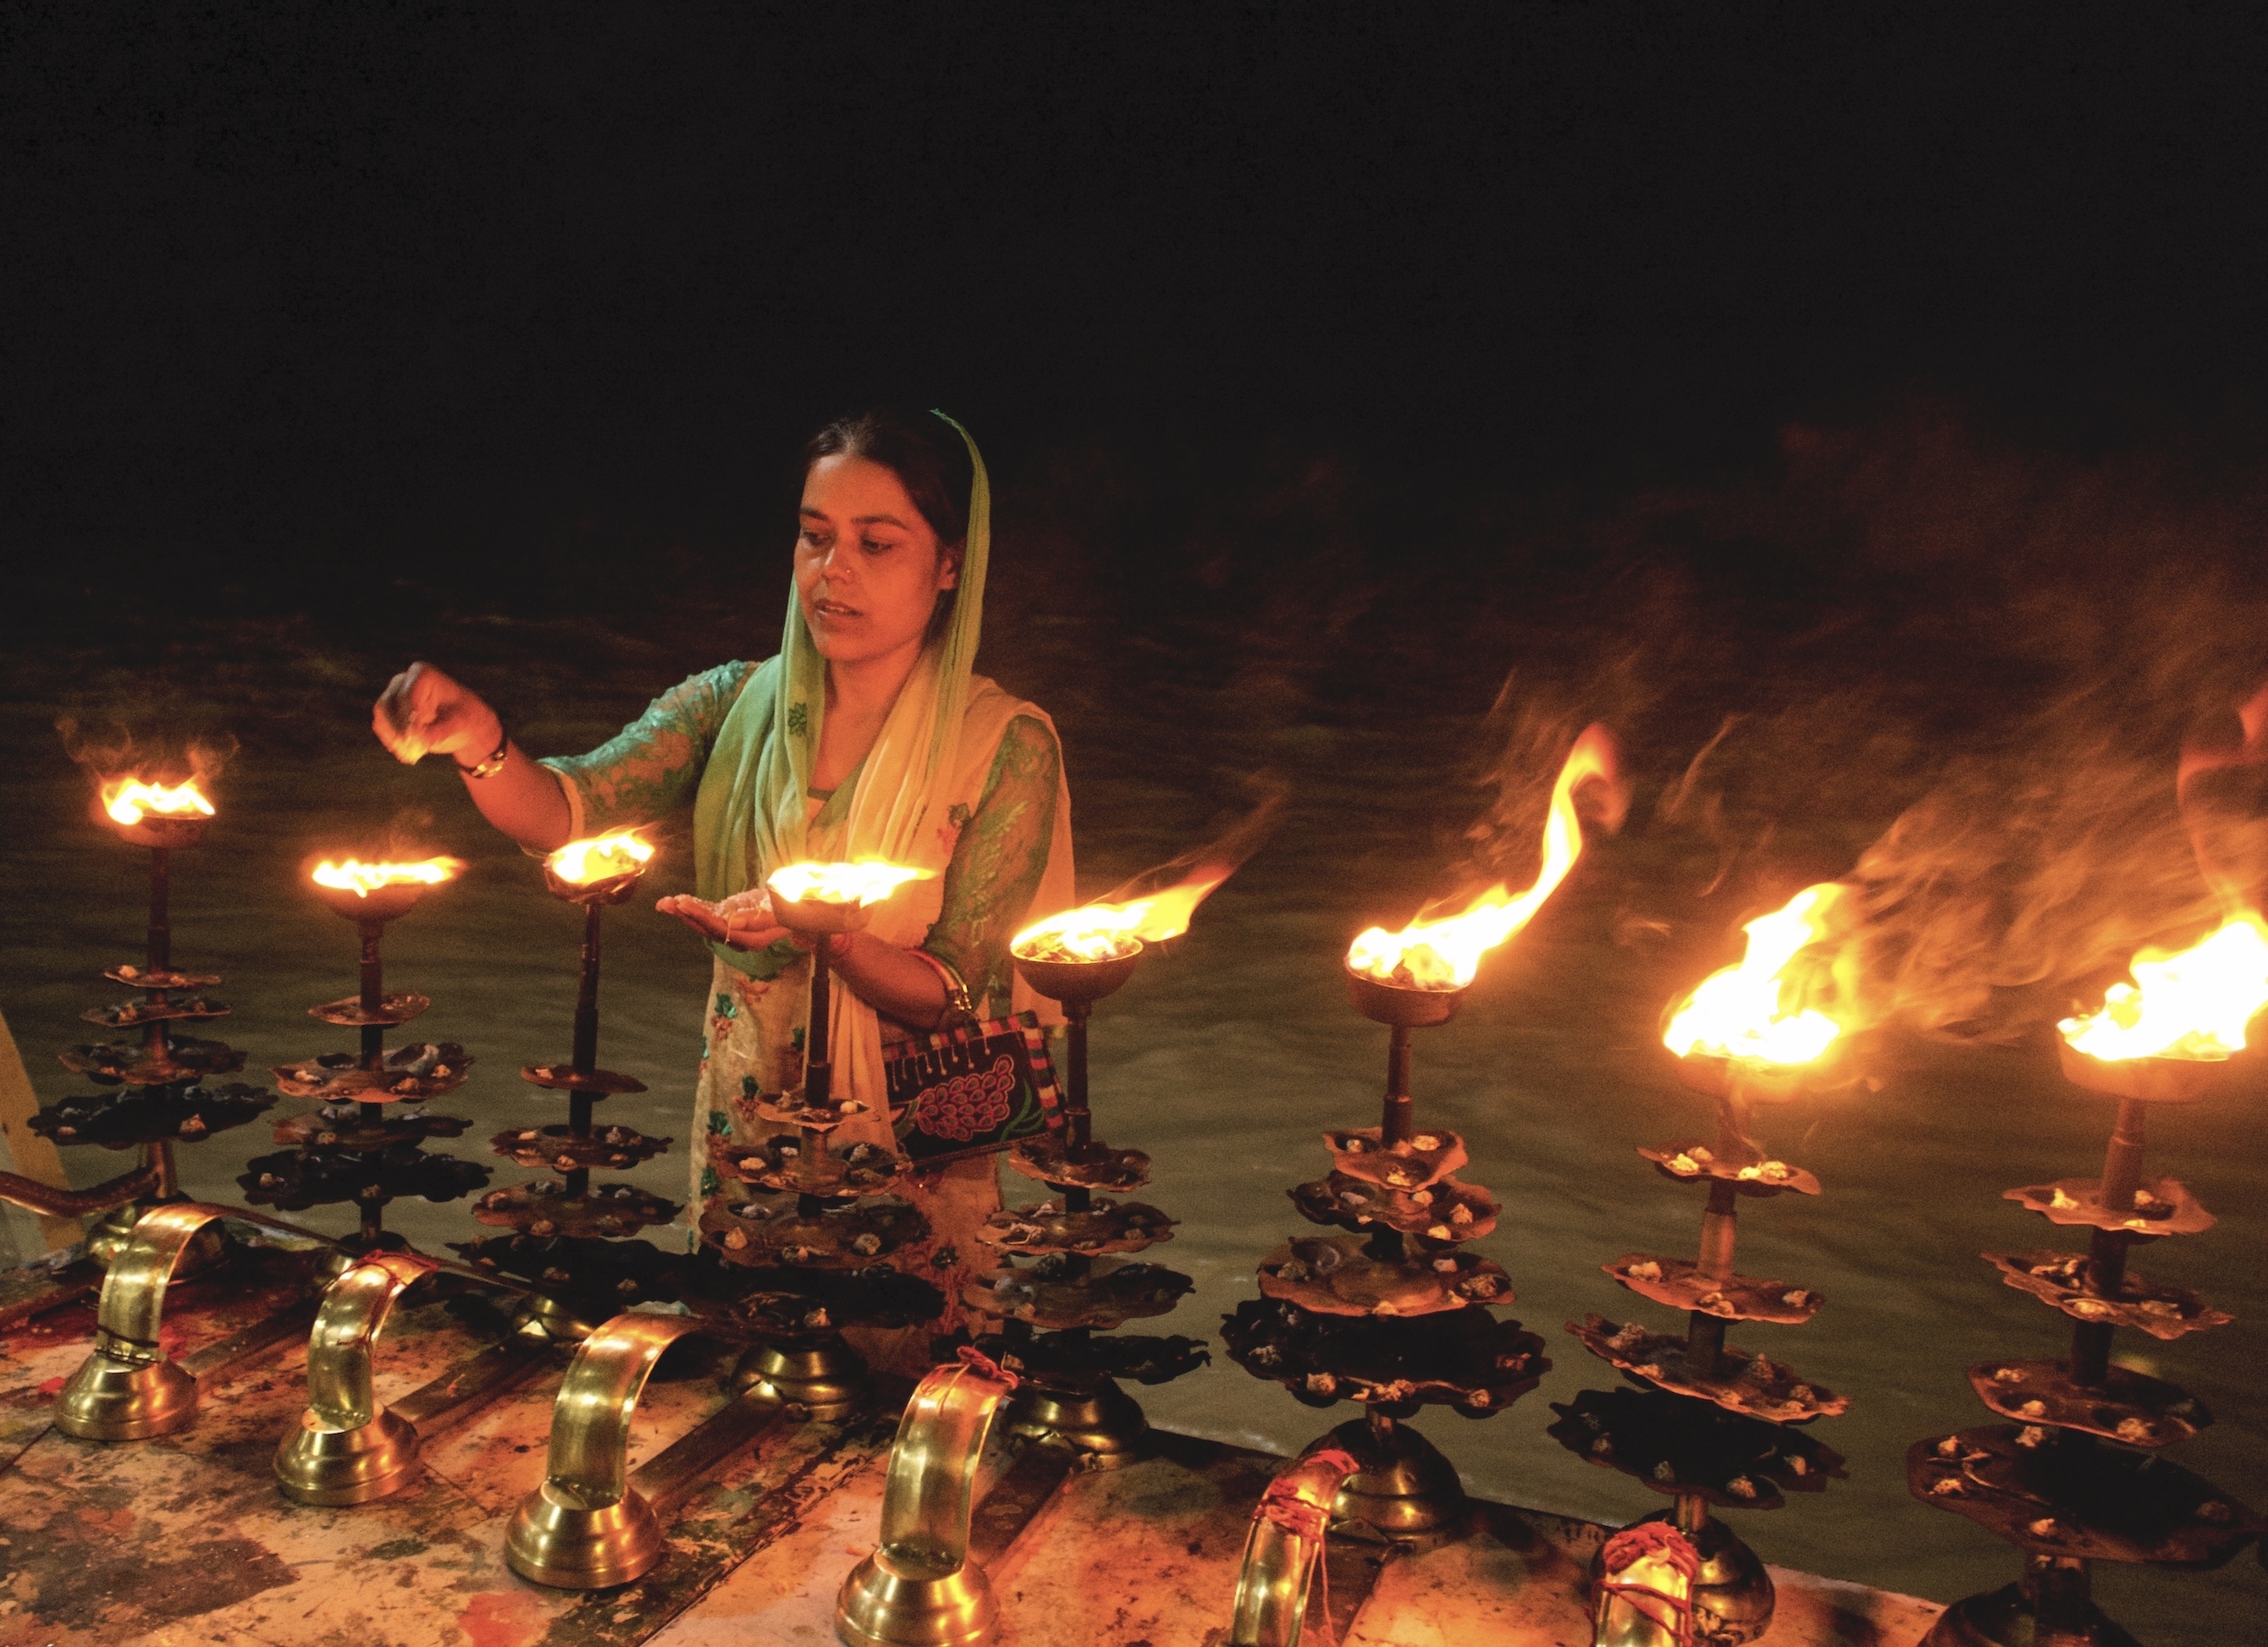 A devotee asking to fulfill her wishes from mother Ganges after the ceremony. Ganga river is believed to remove sins